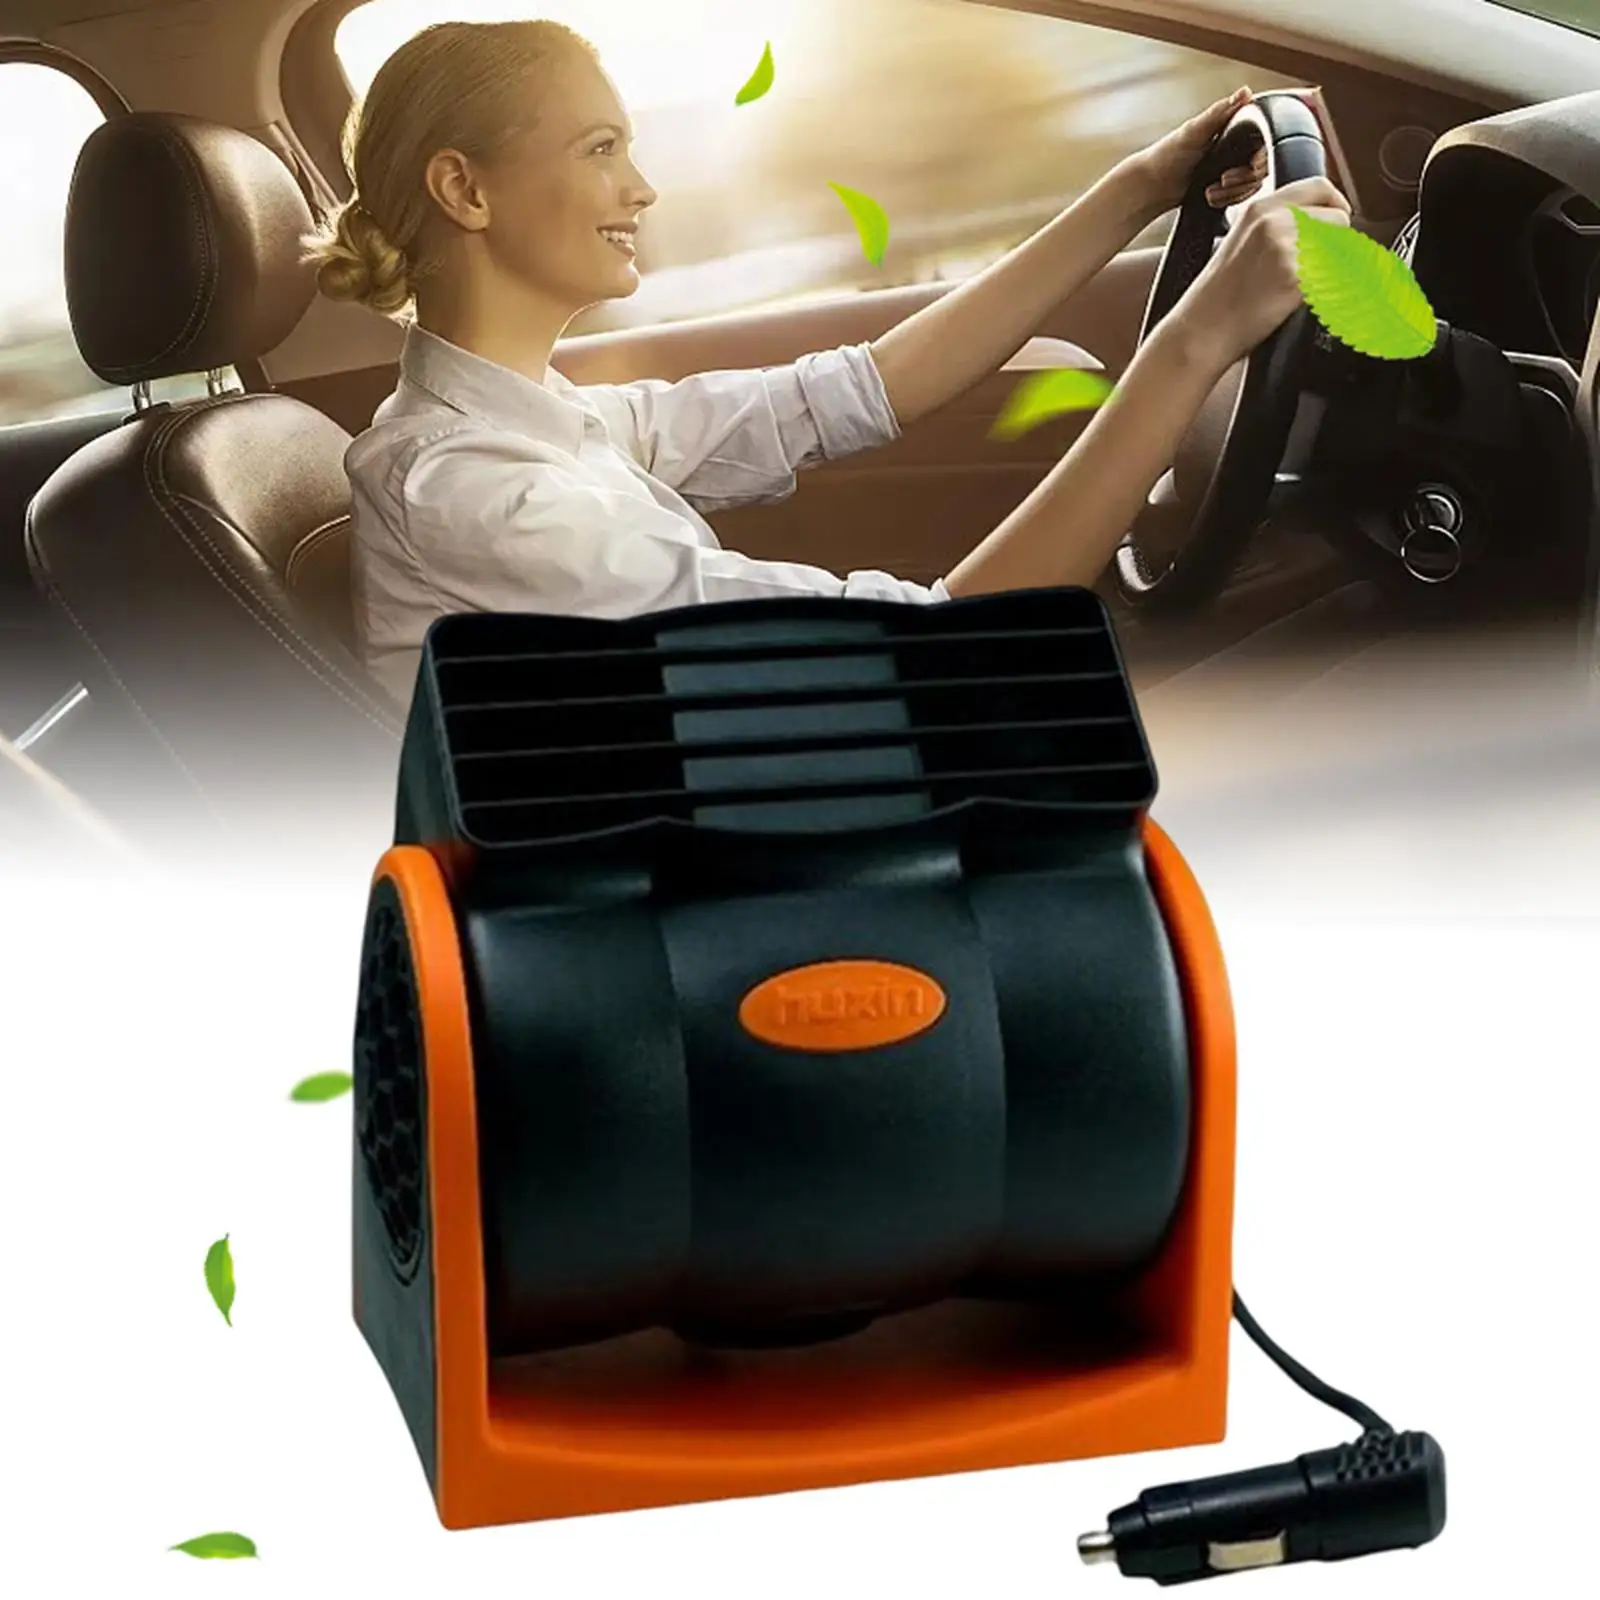 24V Car Truck Cooling Air Fan 2 Speeds Child Safety Design Premium Easy to Carry